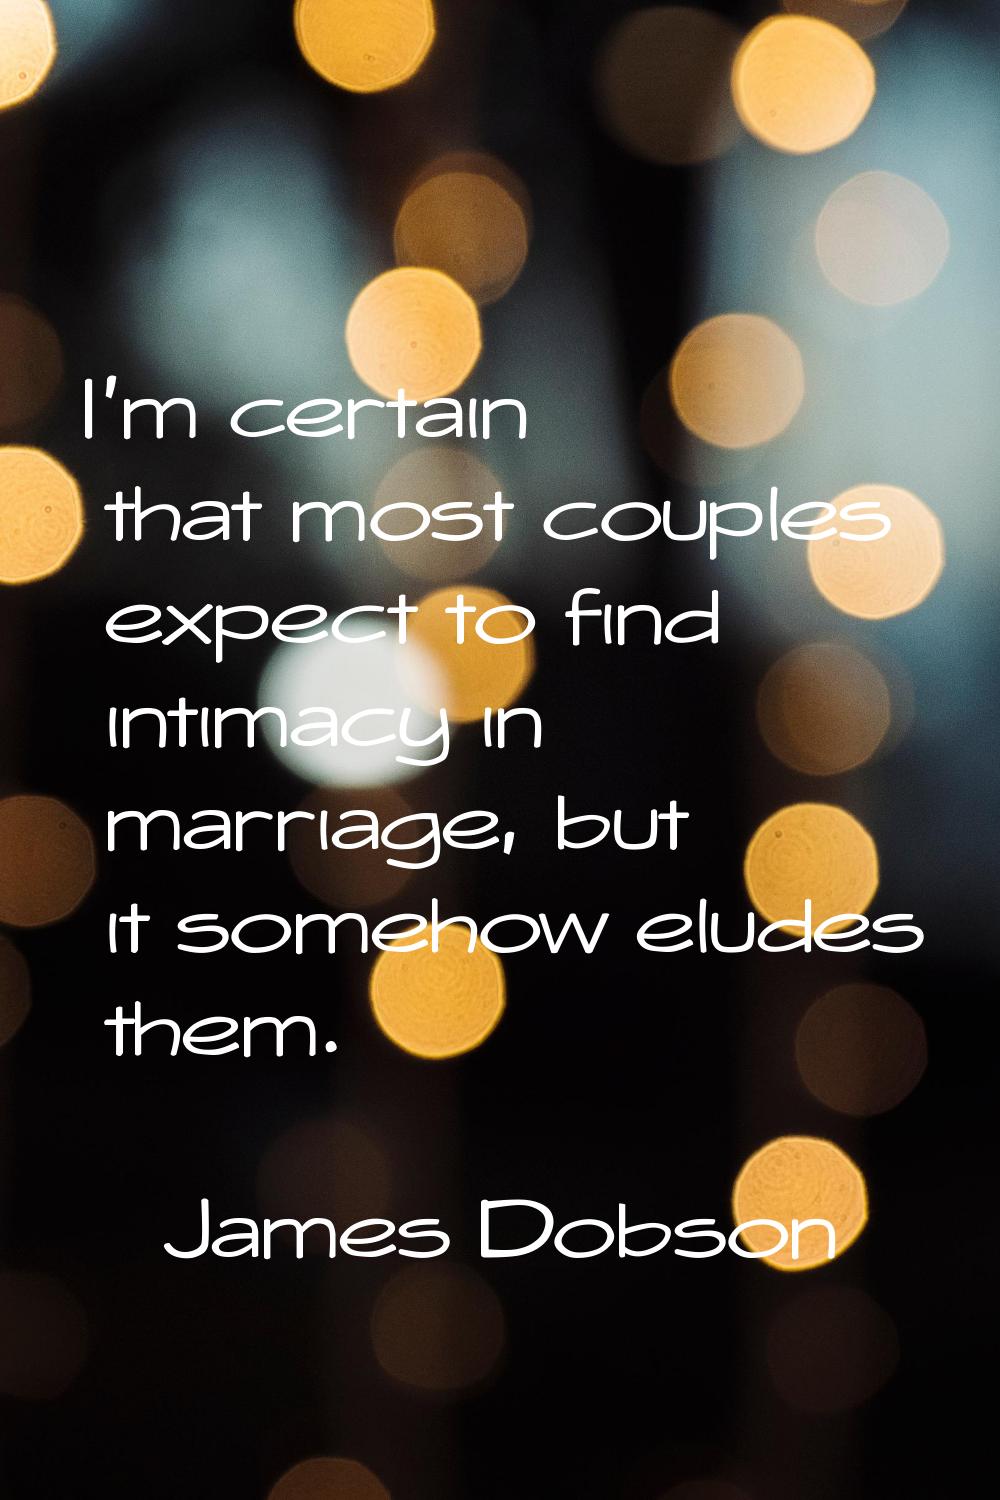 I'm certain that most couples expect to find intimacy in marriage, but it somehow eludes them.